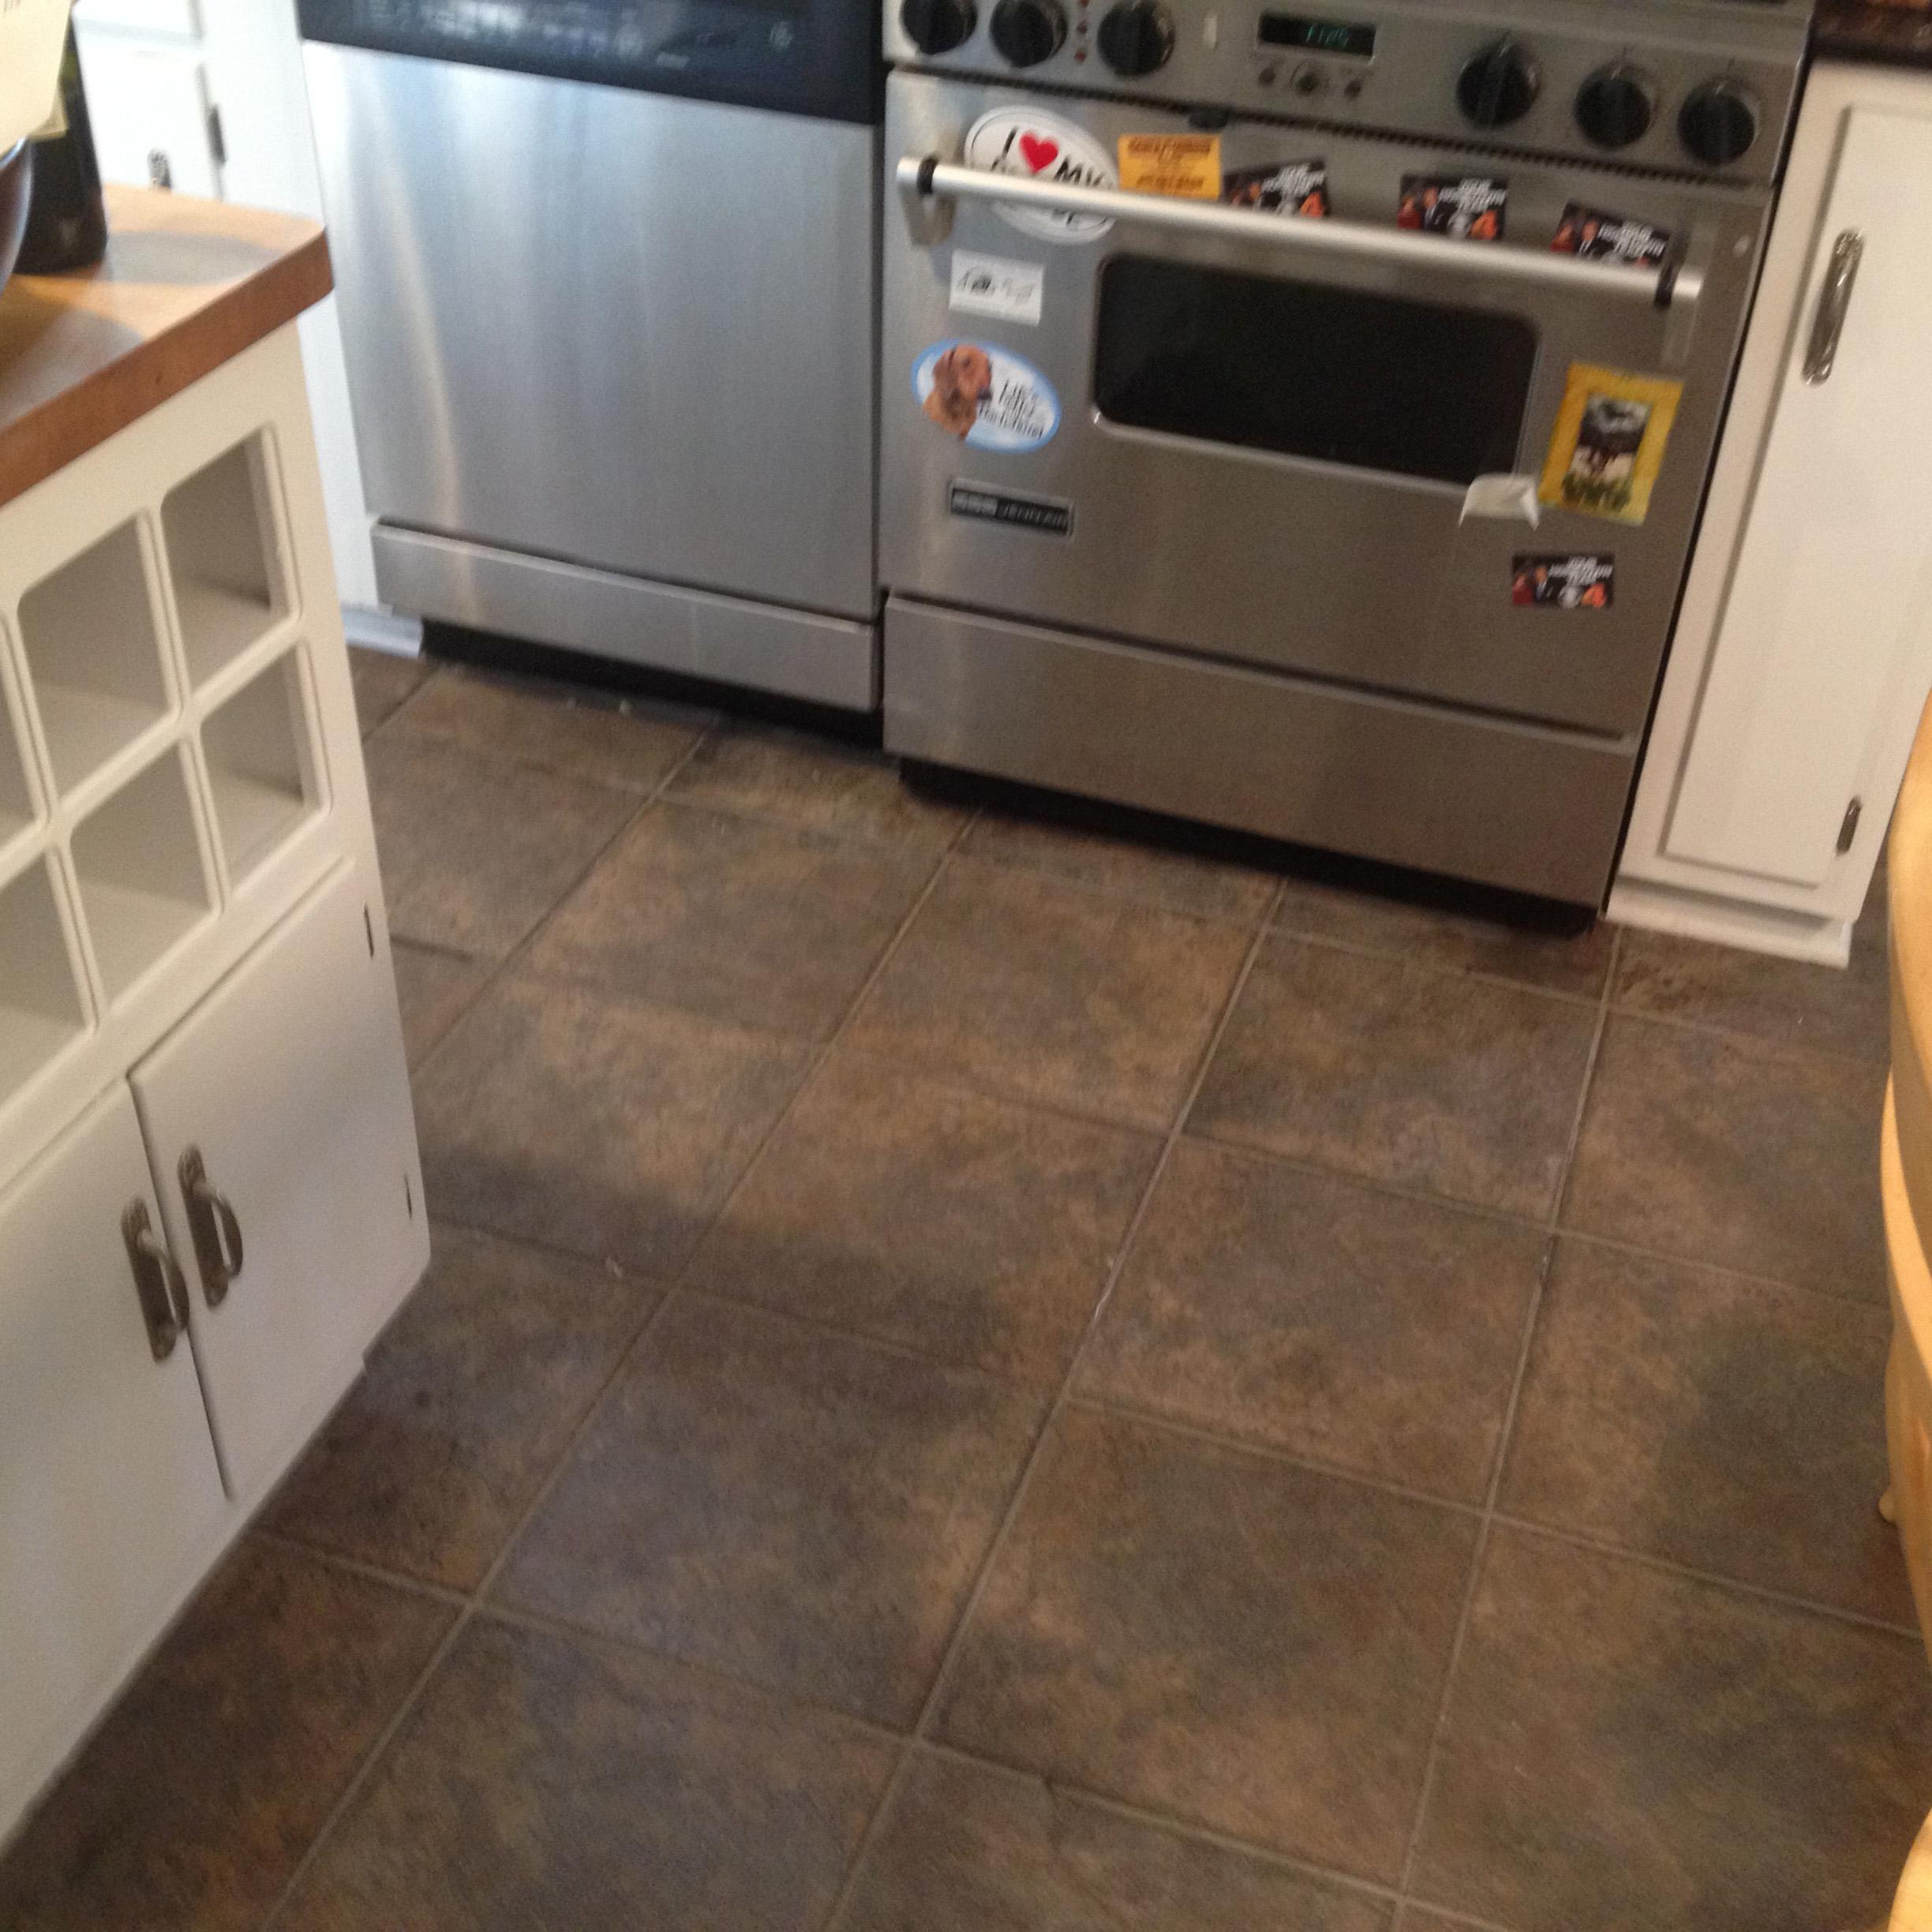 The  tile in this kitchen were cracked, dark and gave the kitchen a unpleasant  design